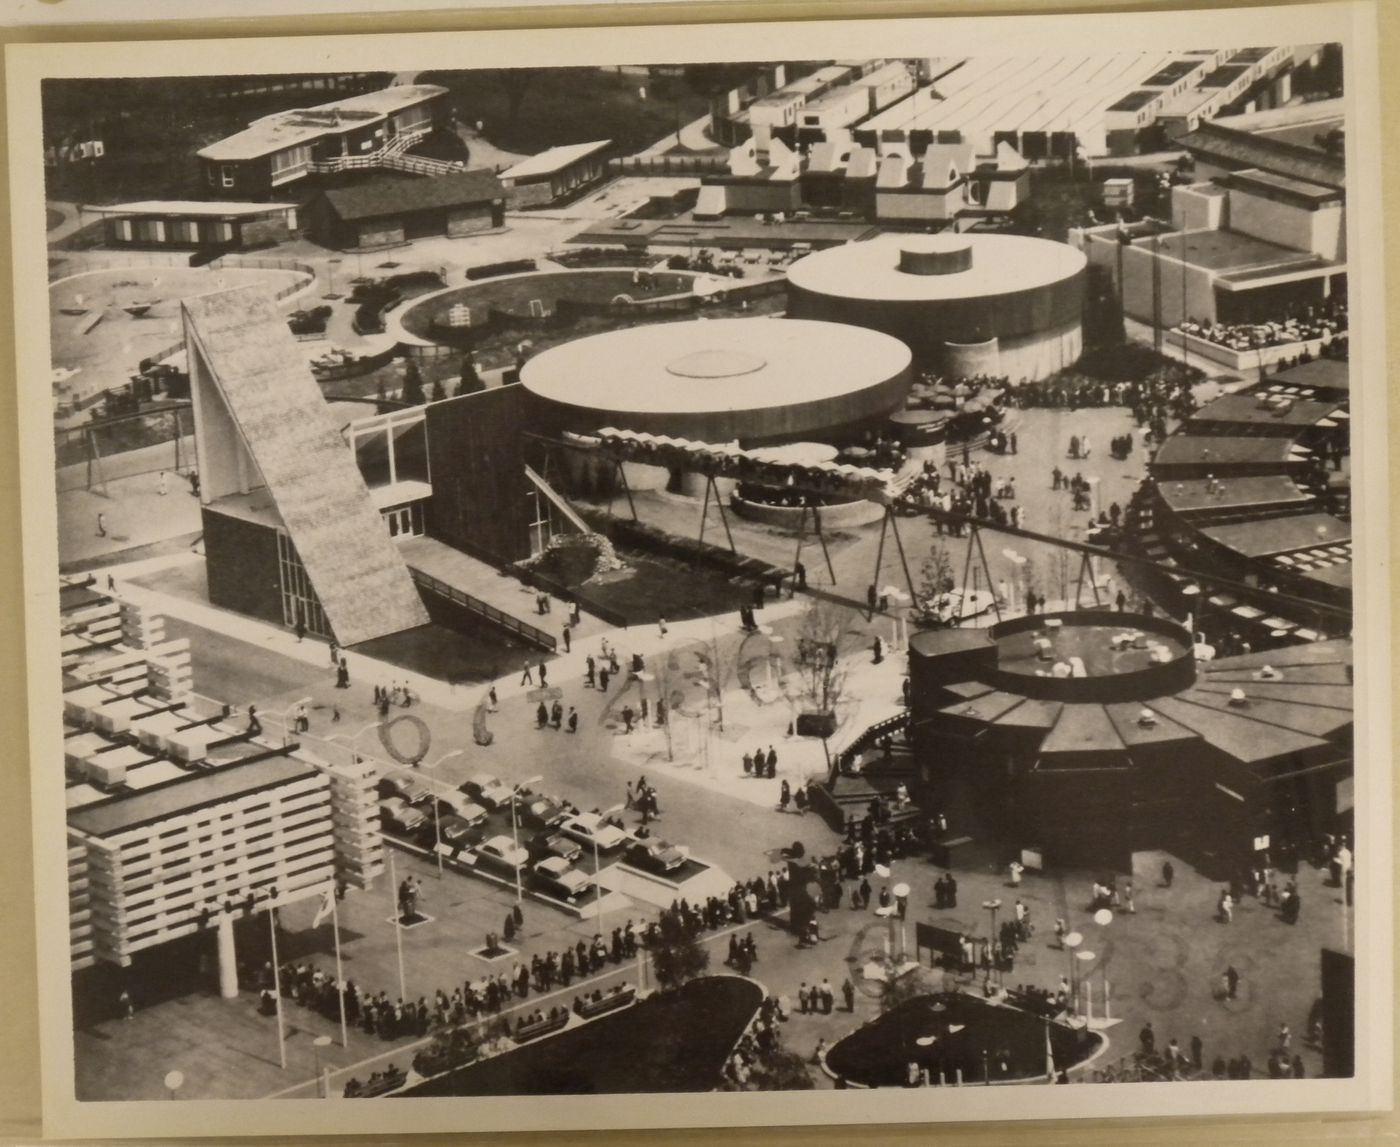 Aerial view of the Brewers and Vermont's Pavilions, Expo 67, Montréal, Québec